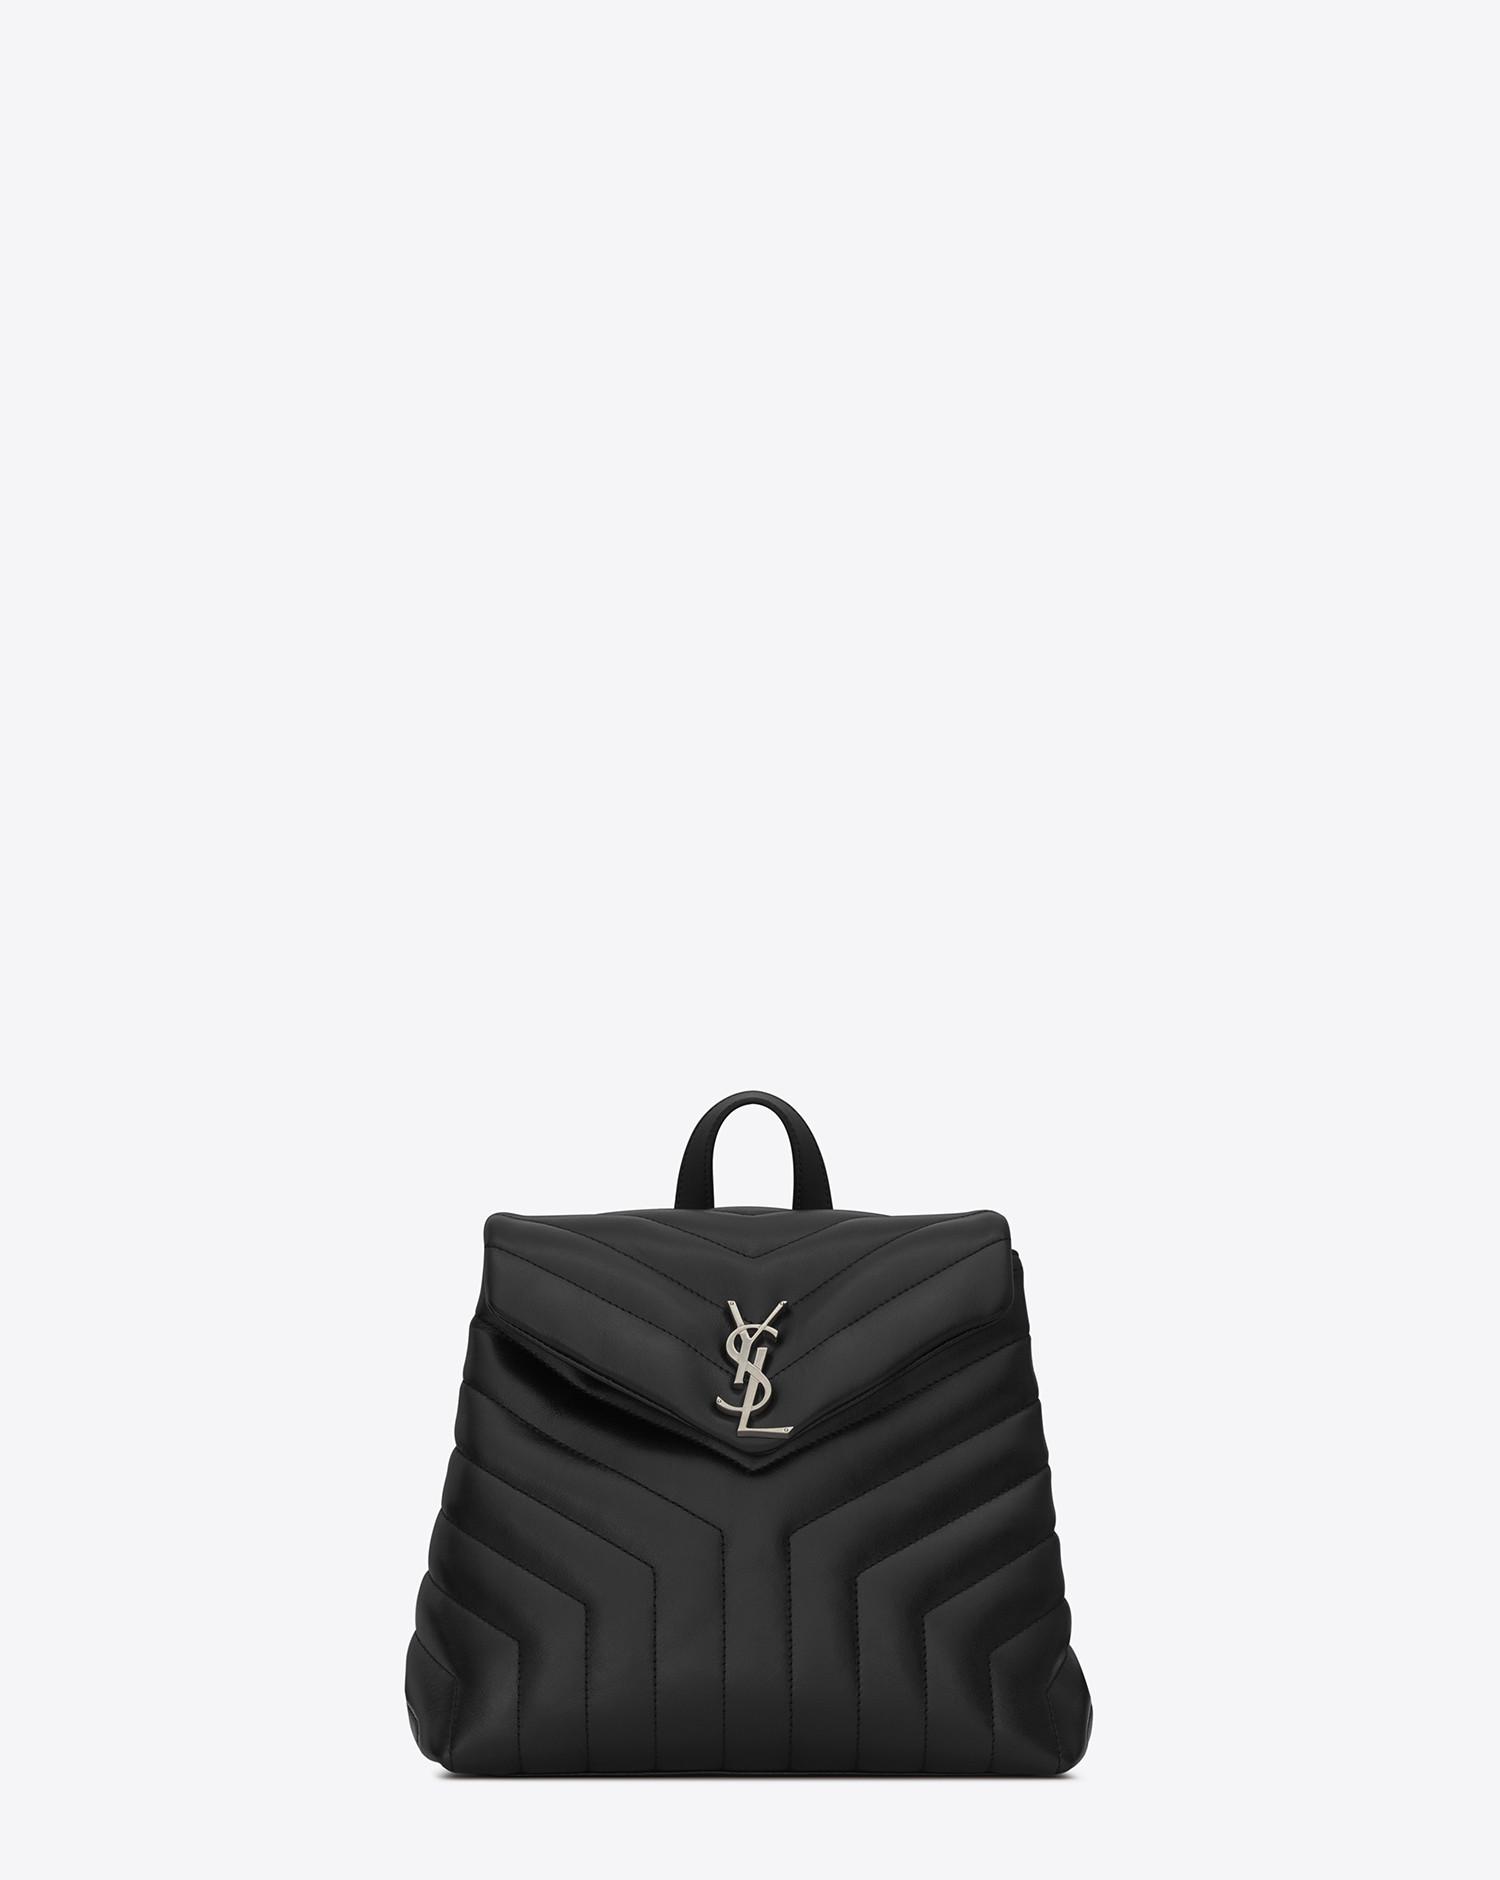 Saint Laurent Loulou Small Backpack In Matelassé "y" Leather in Black | Lyst